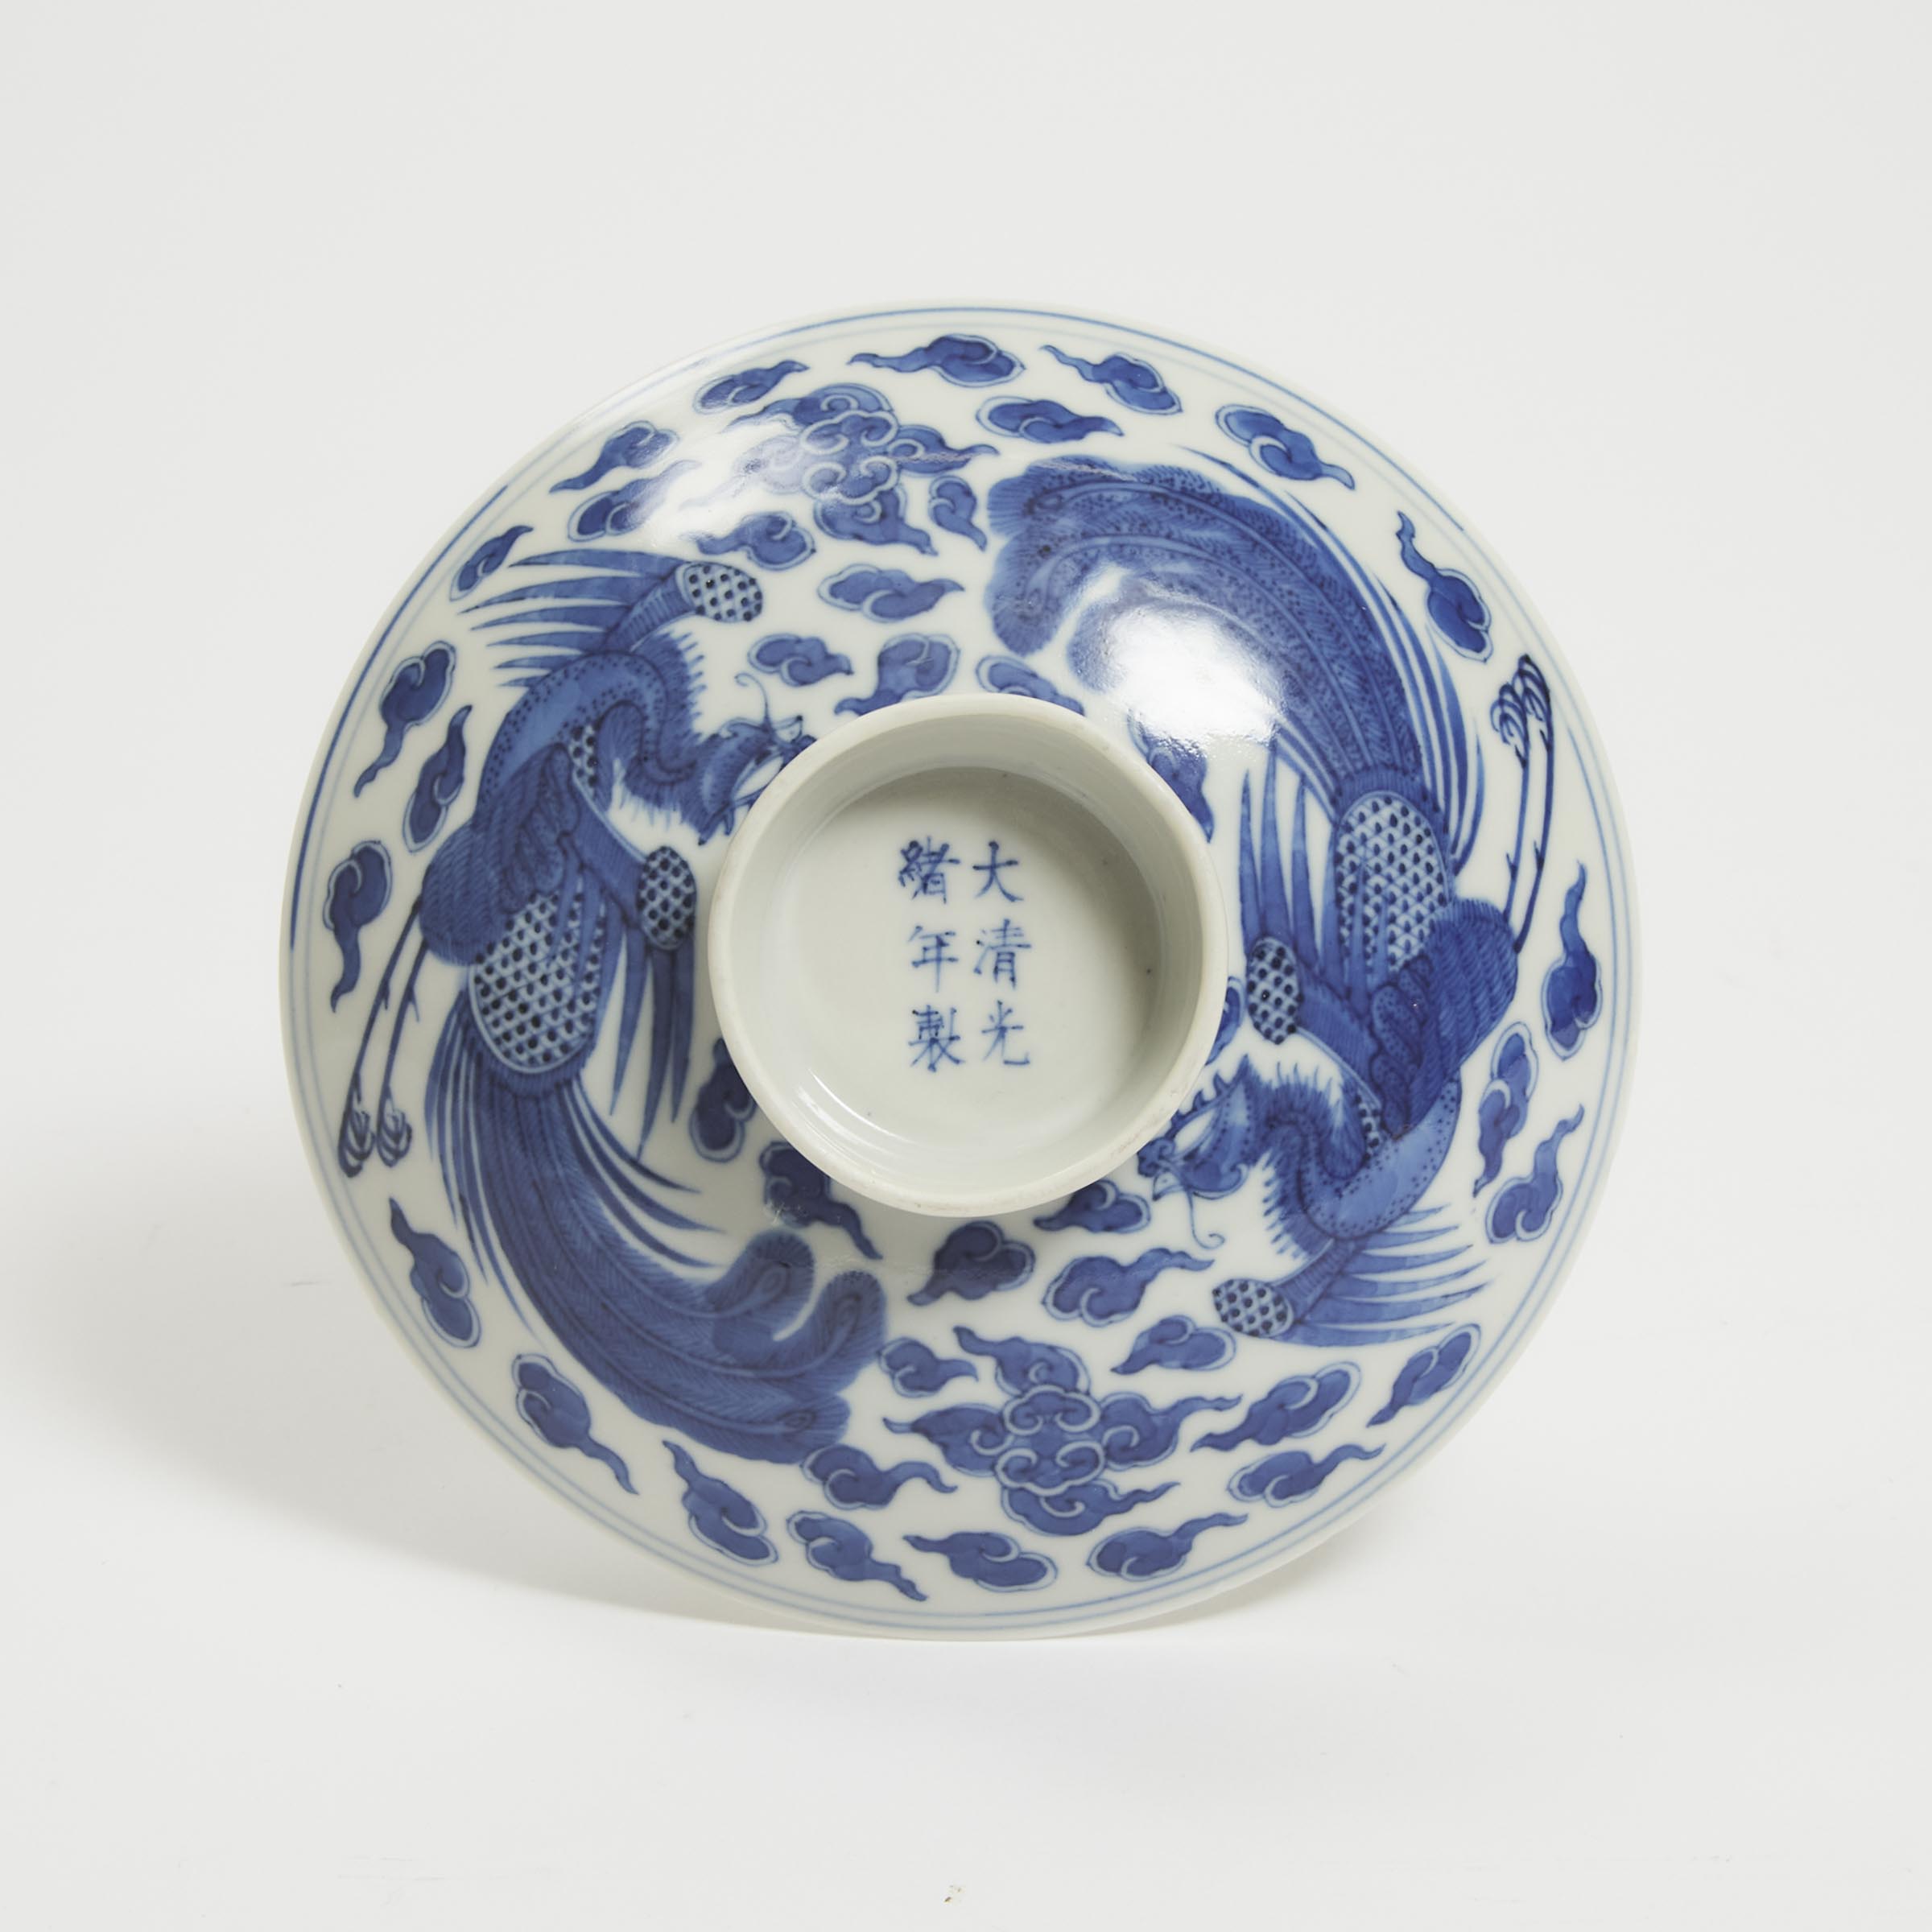 A Blue and White 'Double Phoenix and Cloud' Cover, Guangxu Mark and Period (1875-1908)